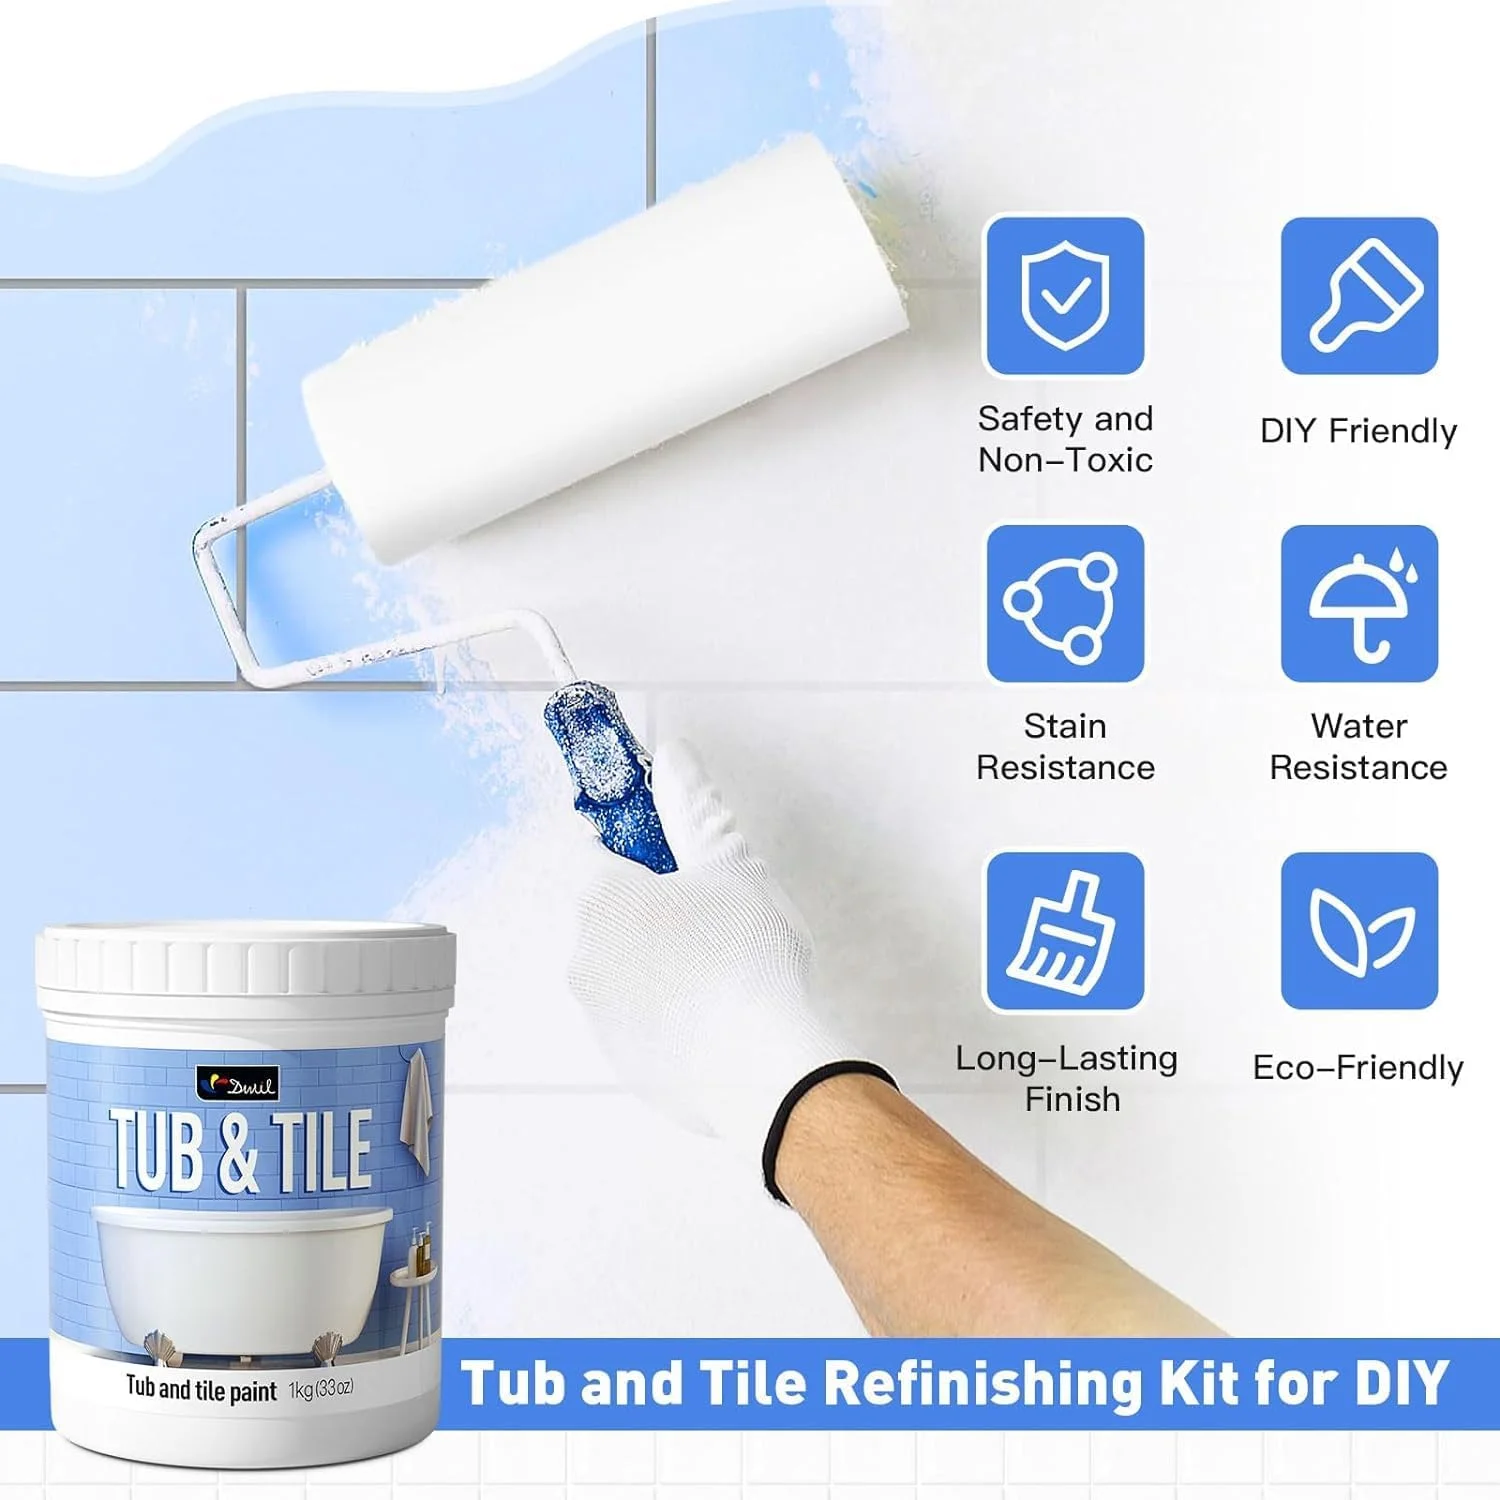 DWIL Tub Paint, Tub and Tile Refinishing Kit 35oz with Tools, Tub Refinishing Kit White Bathtub Paint Water Based Low Odor, Easy to Use Sink Paint for Bathroom Kitchen, Semi-Gloss White, 50-55sq.ft